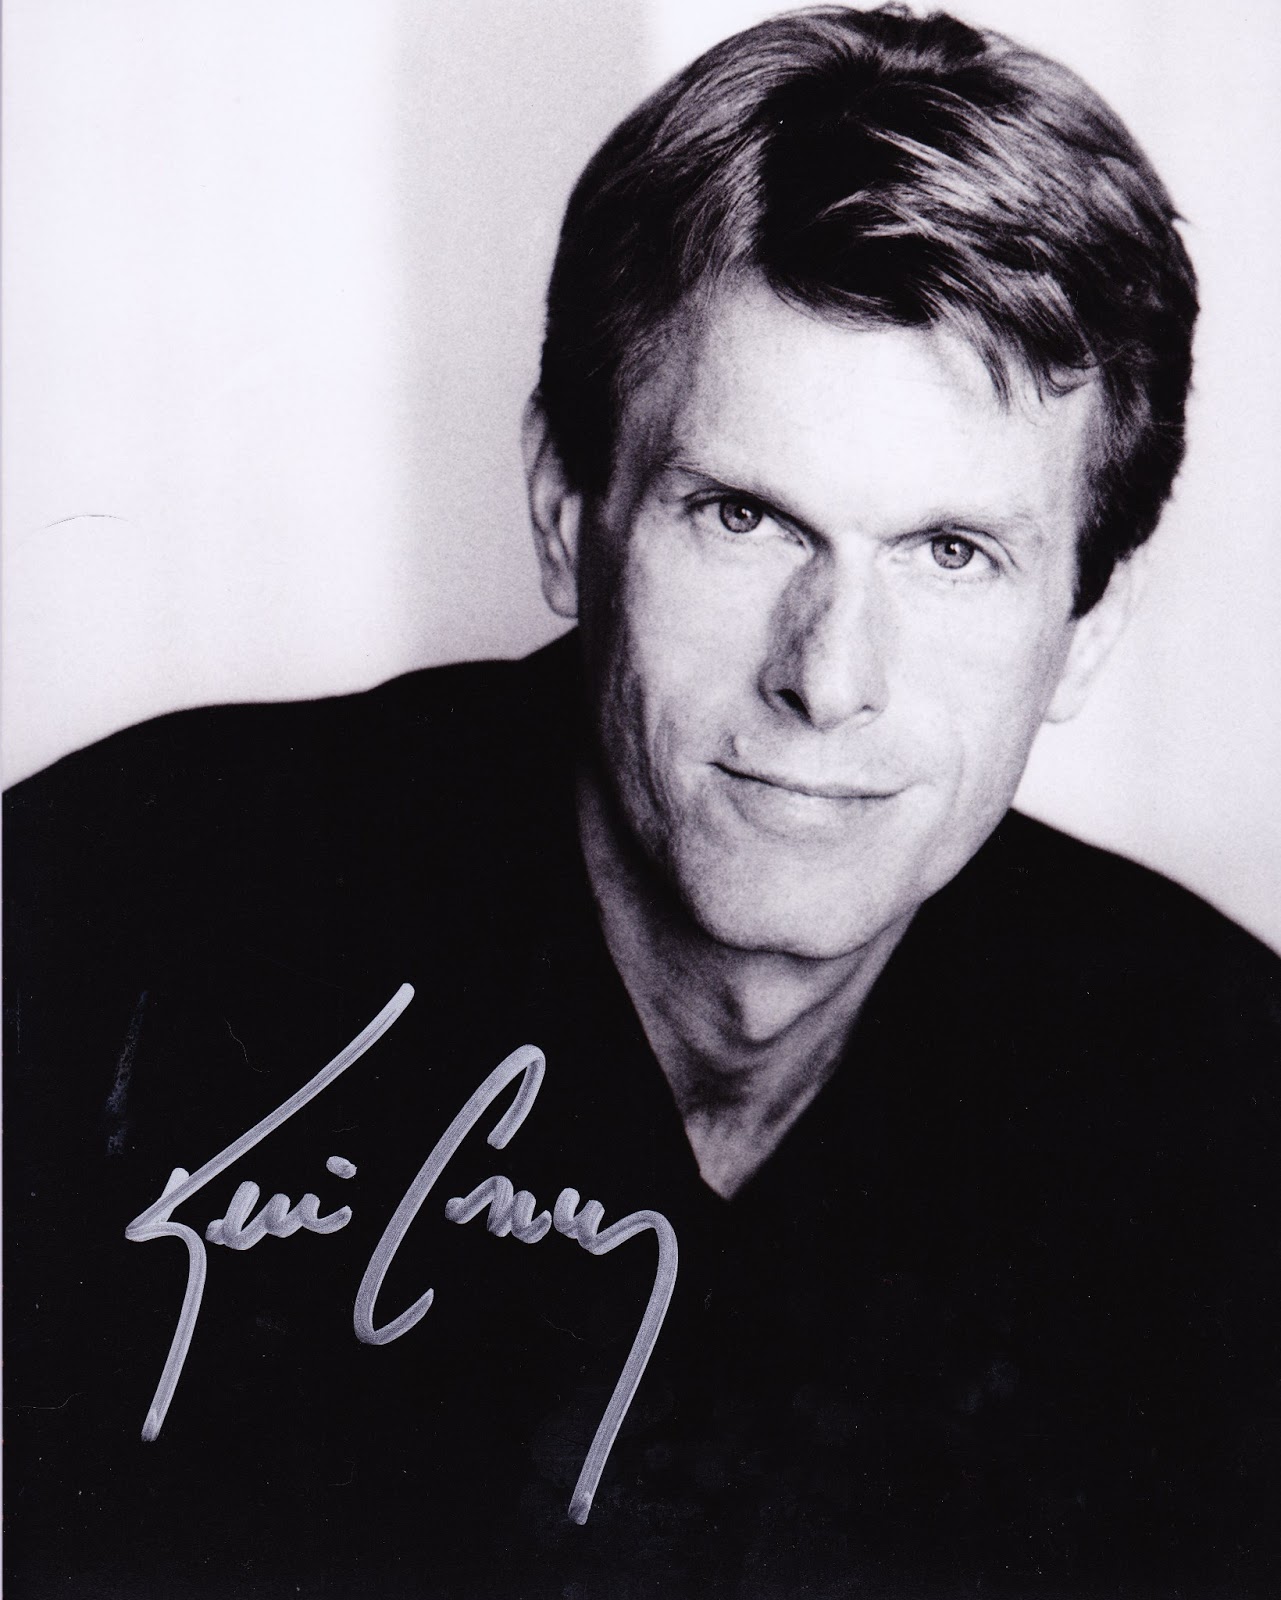 File:Kevin Conroy (42080631580).jpg - Wikimedia Commons